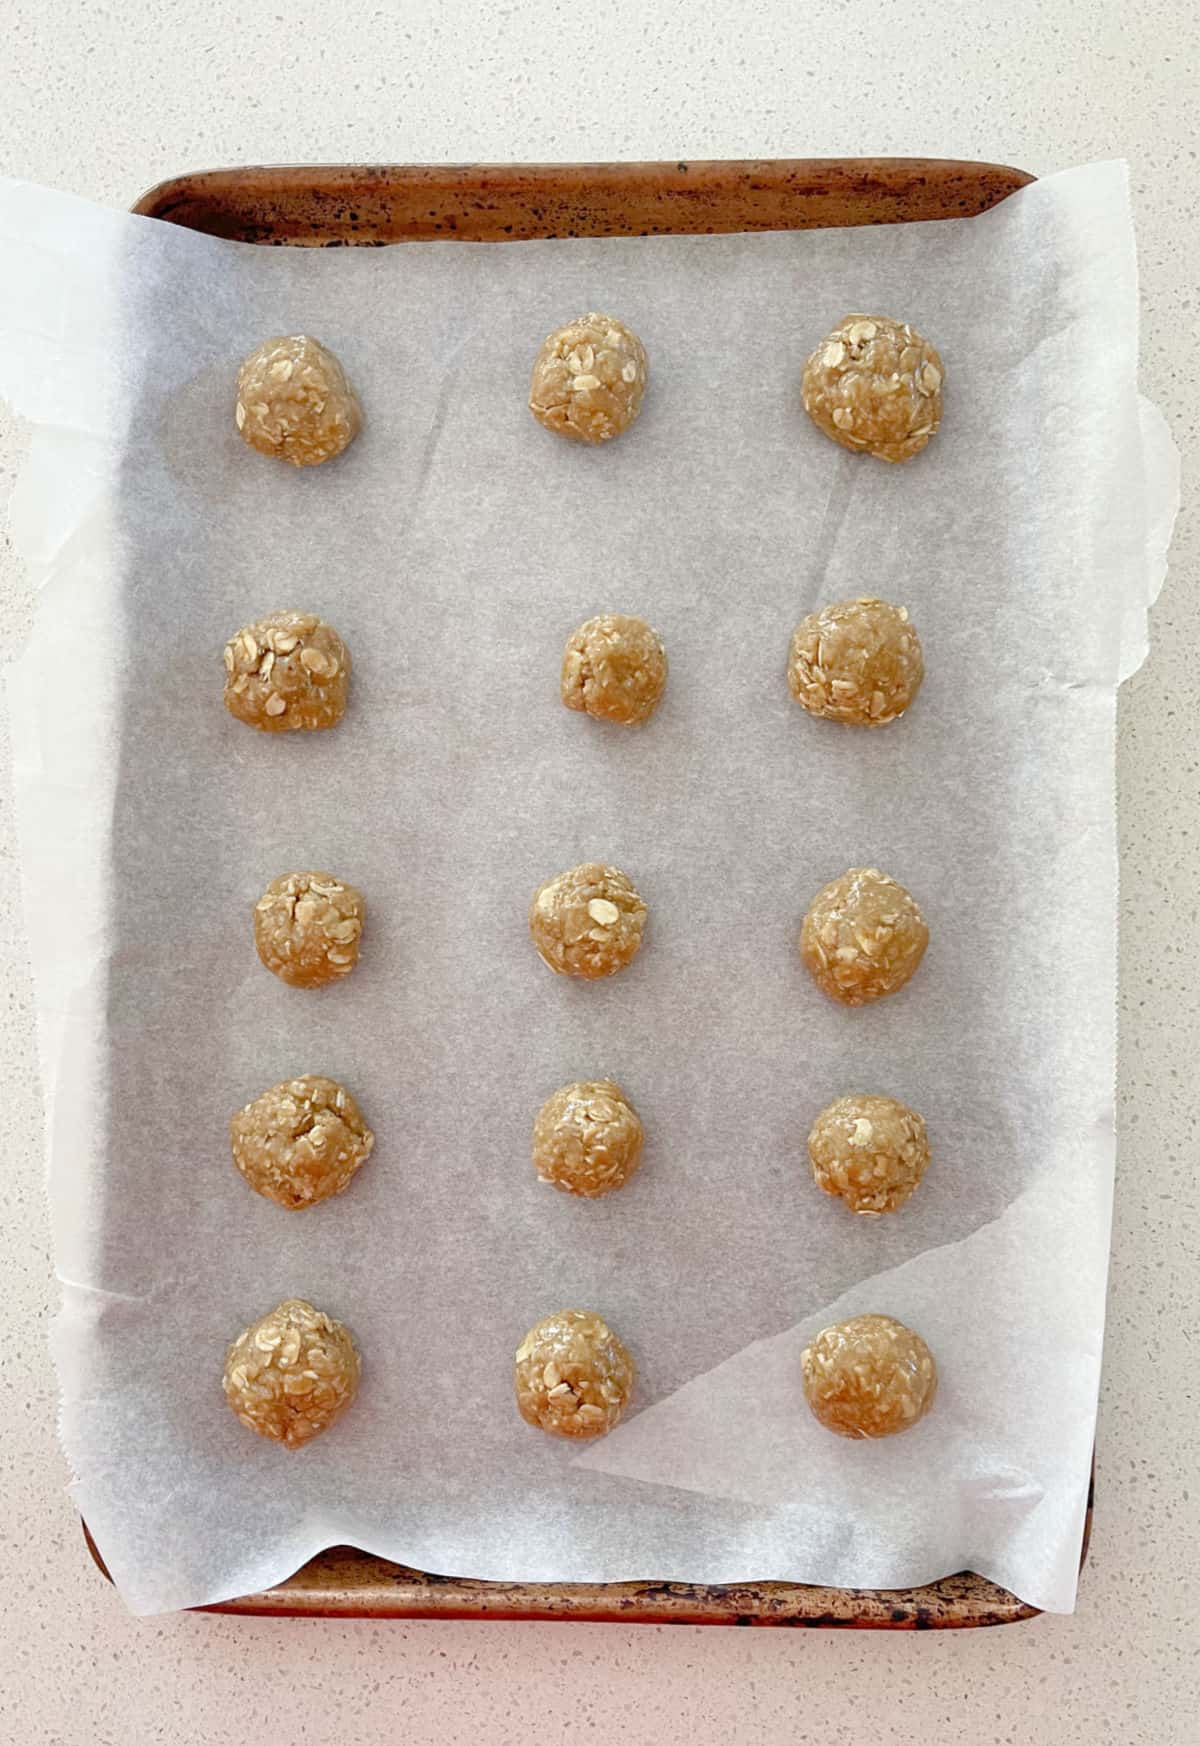 Anzac biscuit mixture rolled into balls on a baking tray.